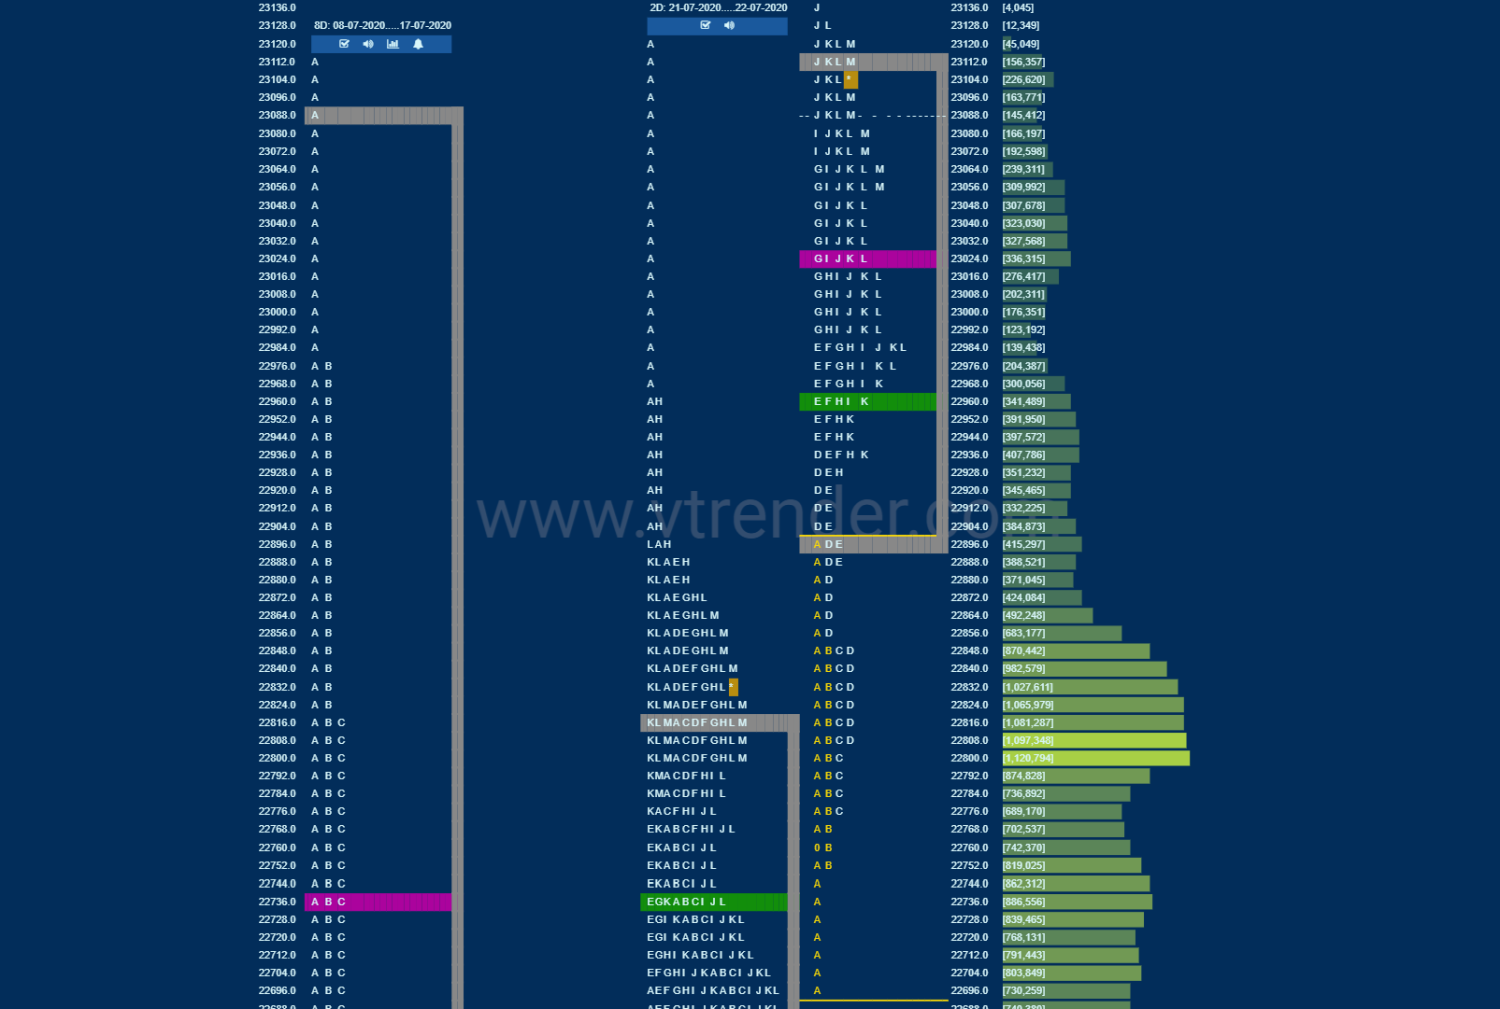 Bnf 3 Market Profile Analysis Dated 23Rd July 2020 Banknifty Futures, Charts, Day Trading, Intraday Trading, Intraday Trading Strategies, Market Profile, Market Profile Trading Strategies, Nifty Futures, Order Flow Analysis, Support And Resistance, Technical Analysis, Trading Strategies, Volume Profile Trading